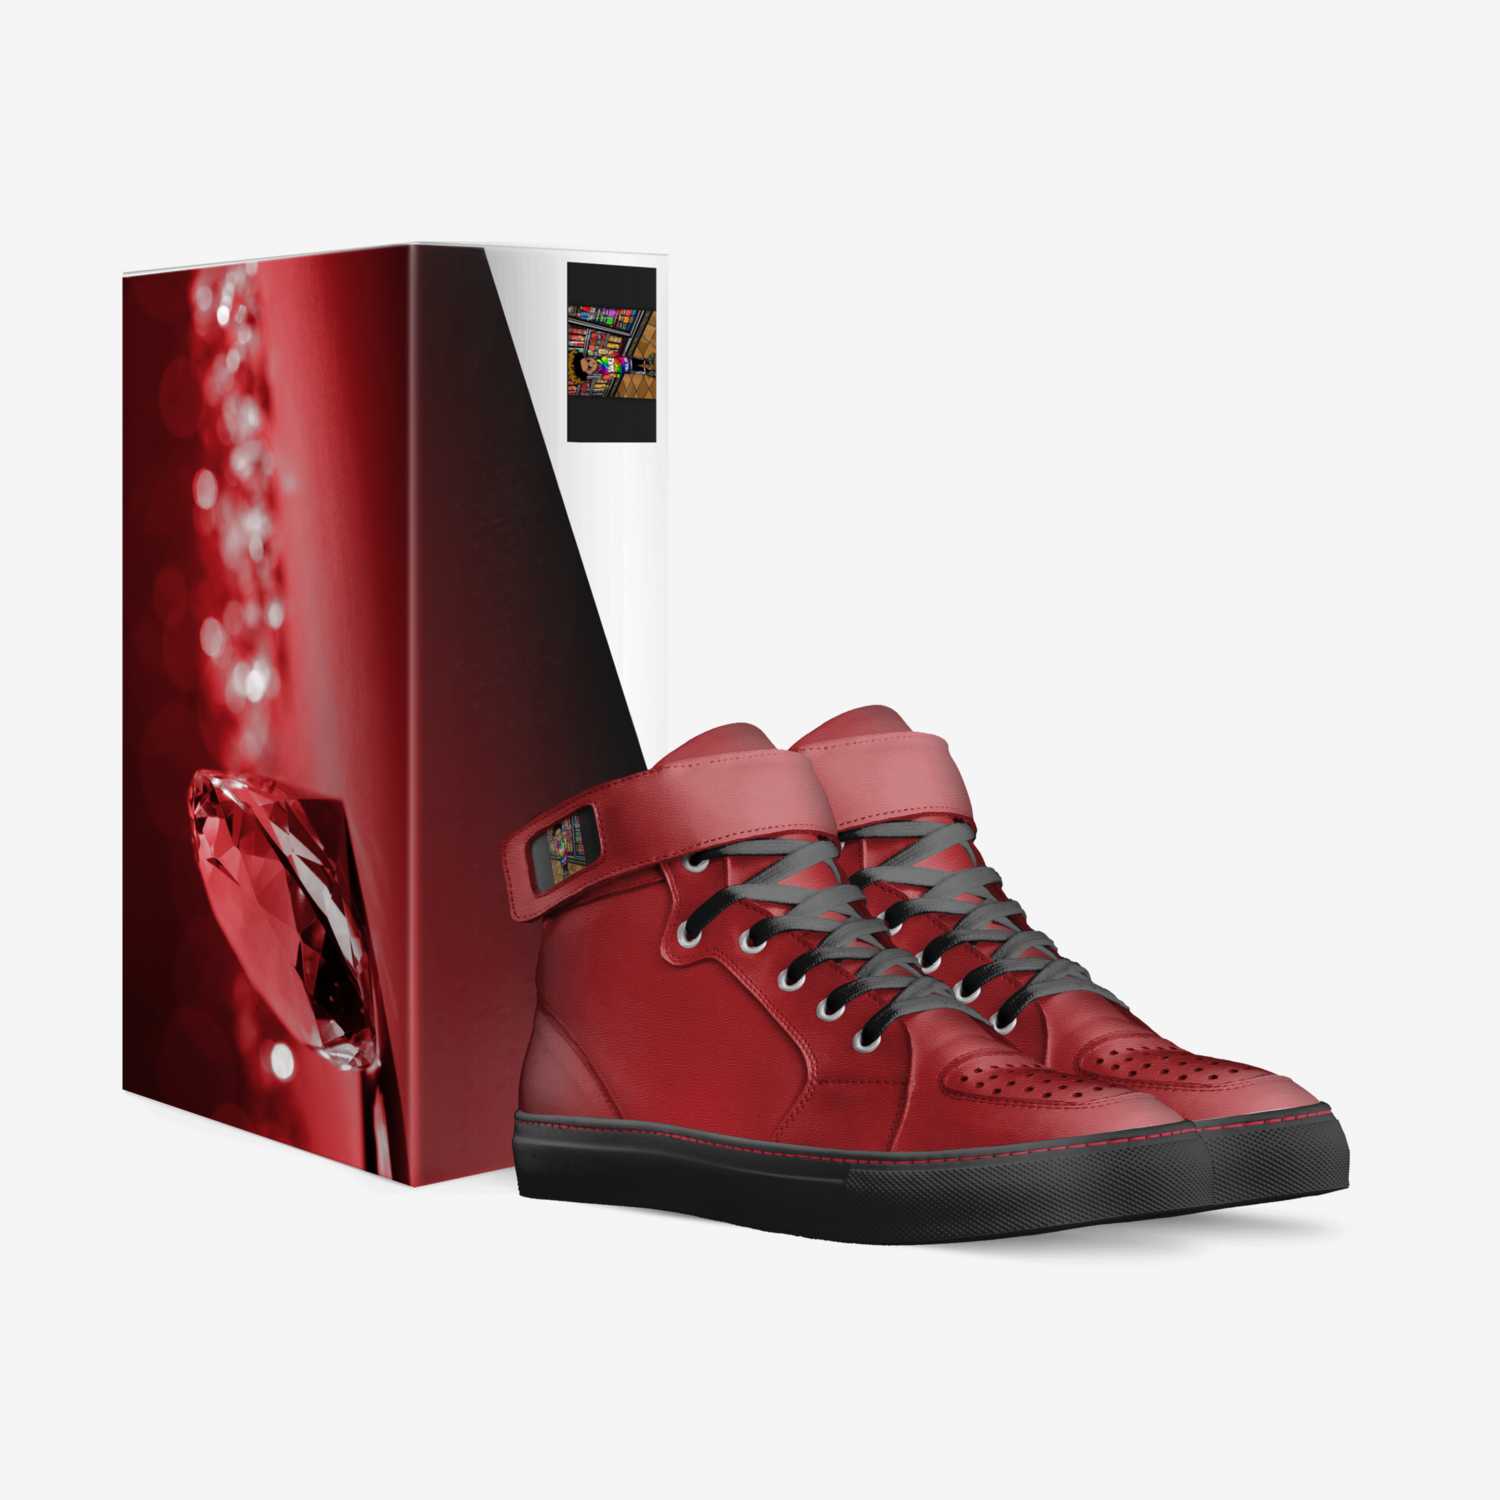 MR.b sauce class custom made in Italy shoes by Jaylen Linsday | Box view